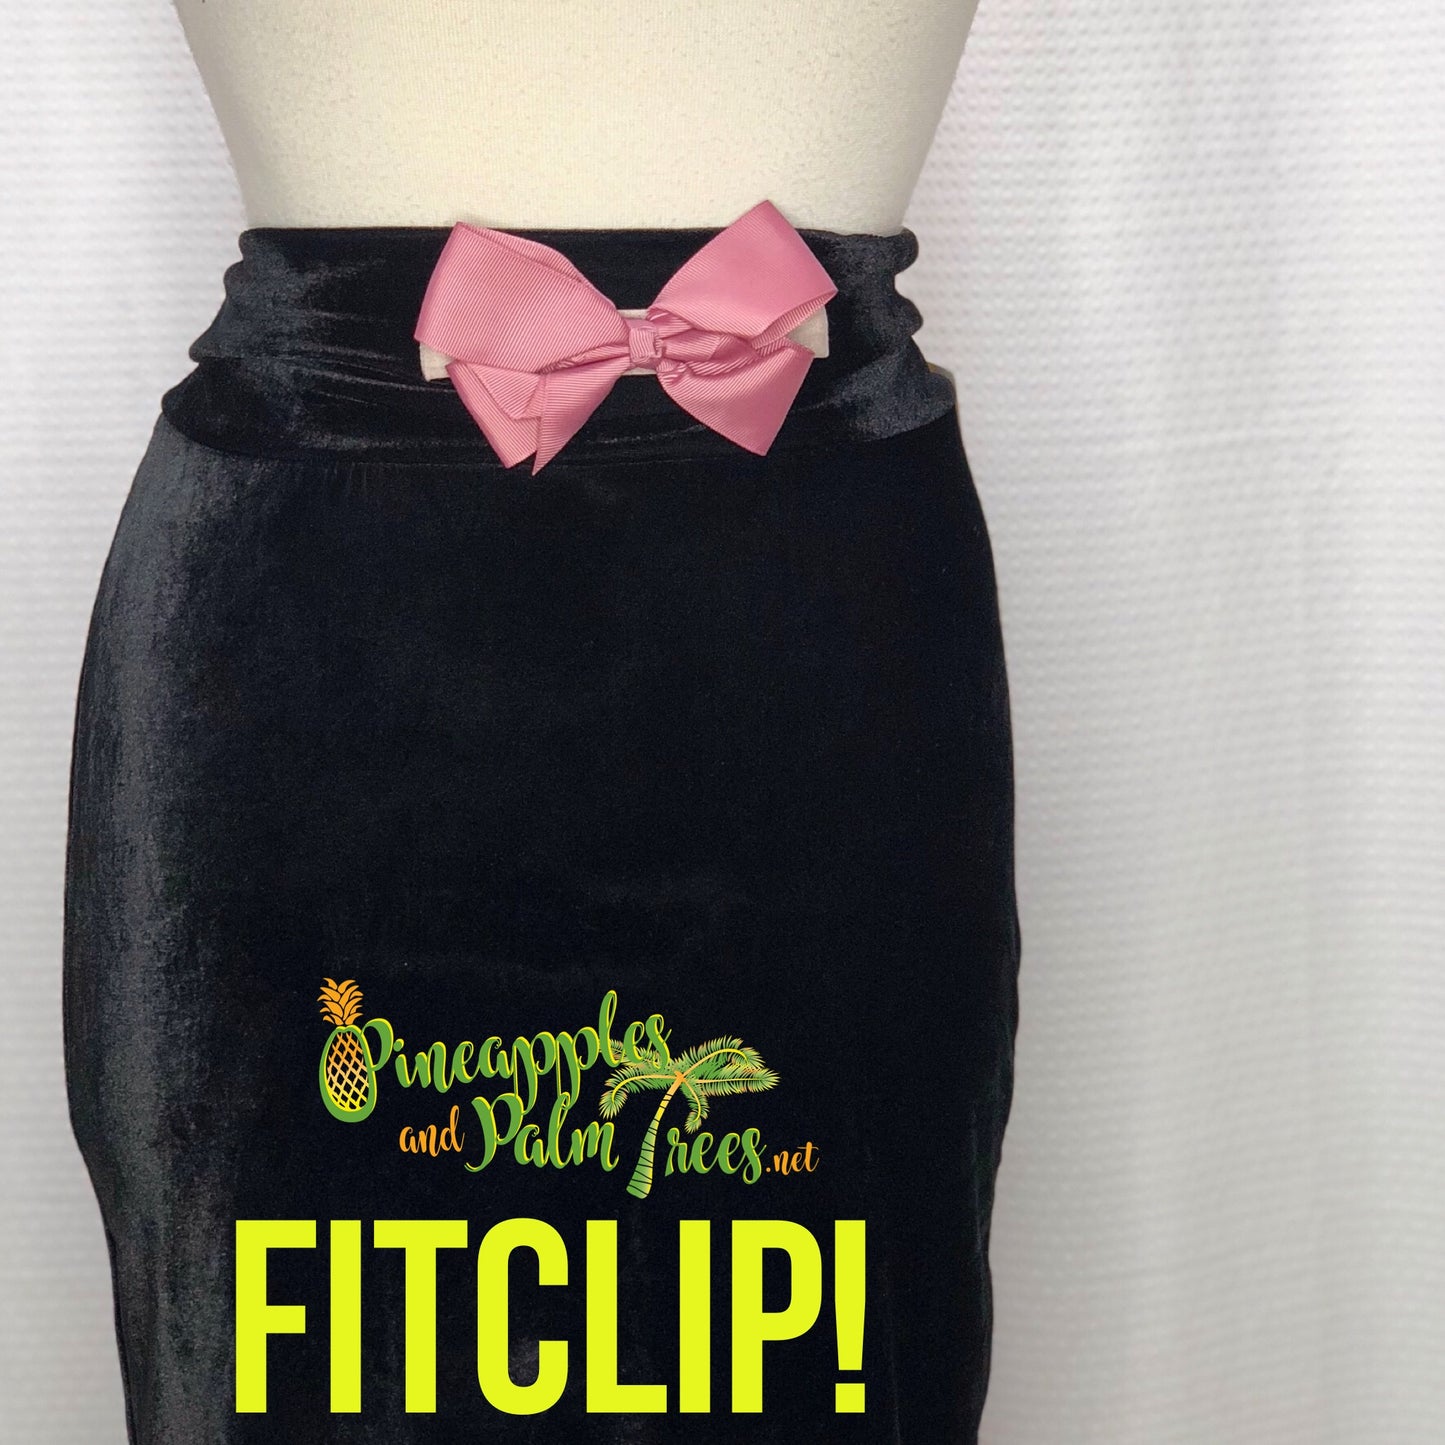 Against a white background, a black mini skirt is displayed on a mannequin.  A dusty rose FitClip with a bow is attached to the front of the skirt, like a belt, as a demo example of how to style a FitClip.  